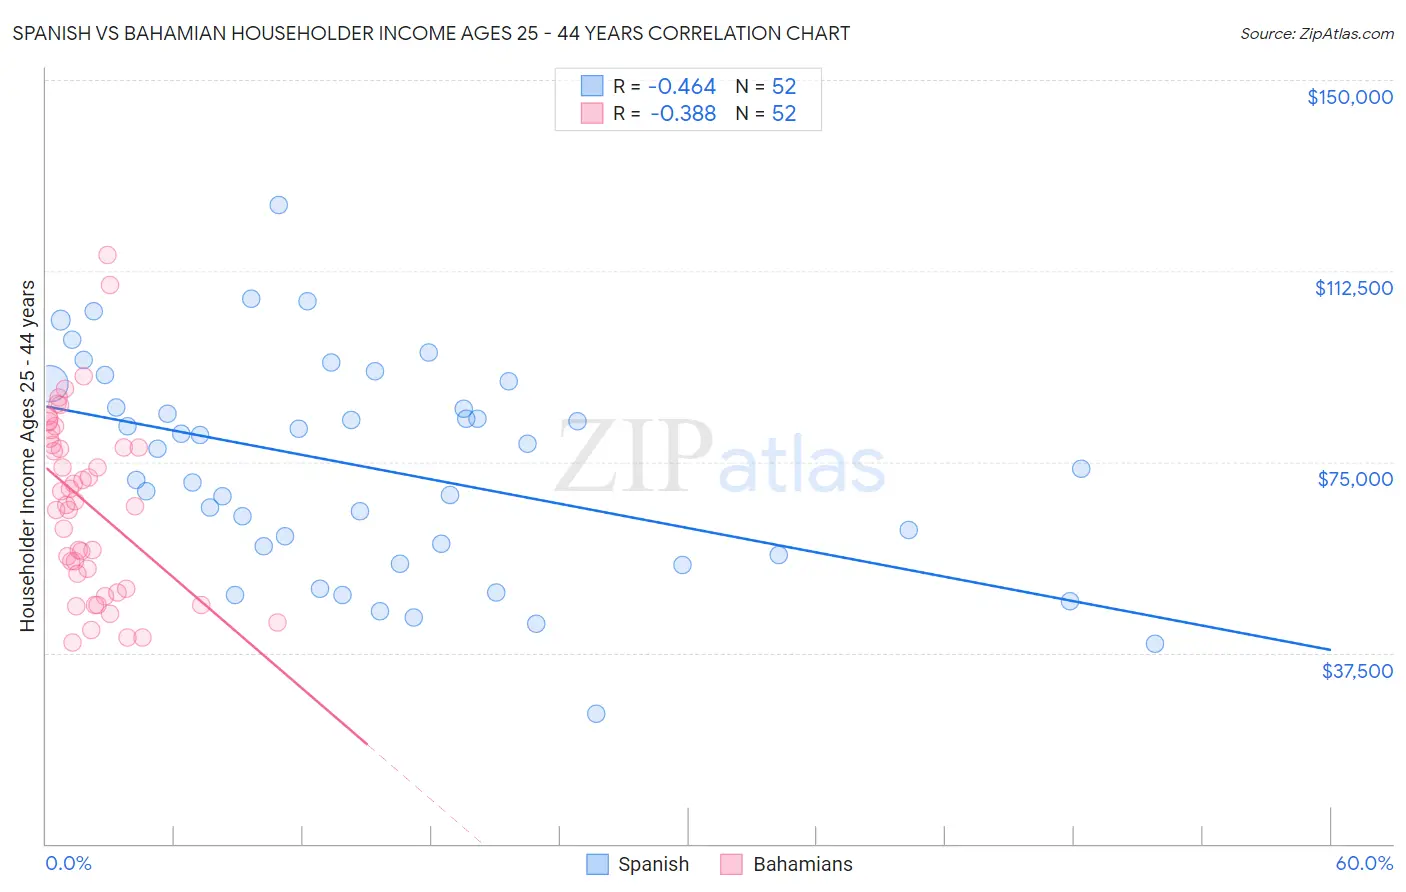 Spanish vs Bahamian Householder Income Ages 25 - 44 years